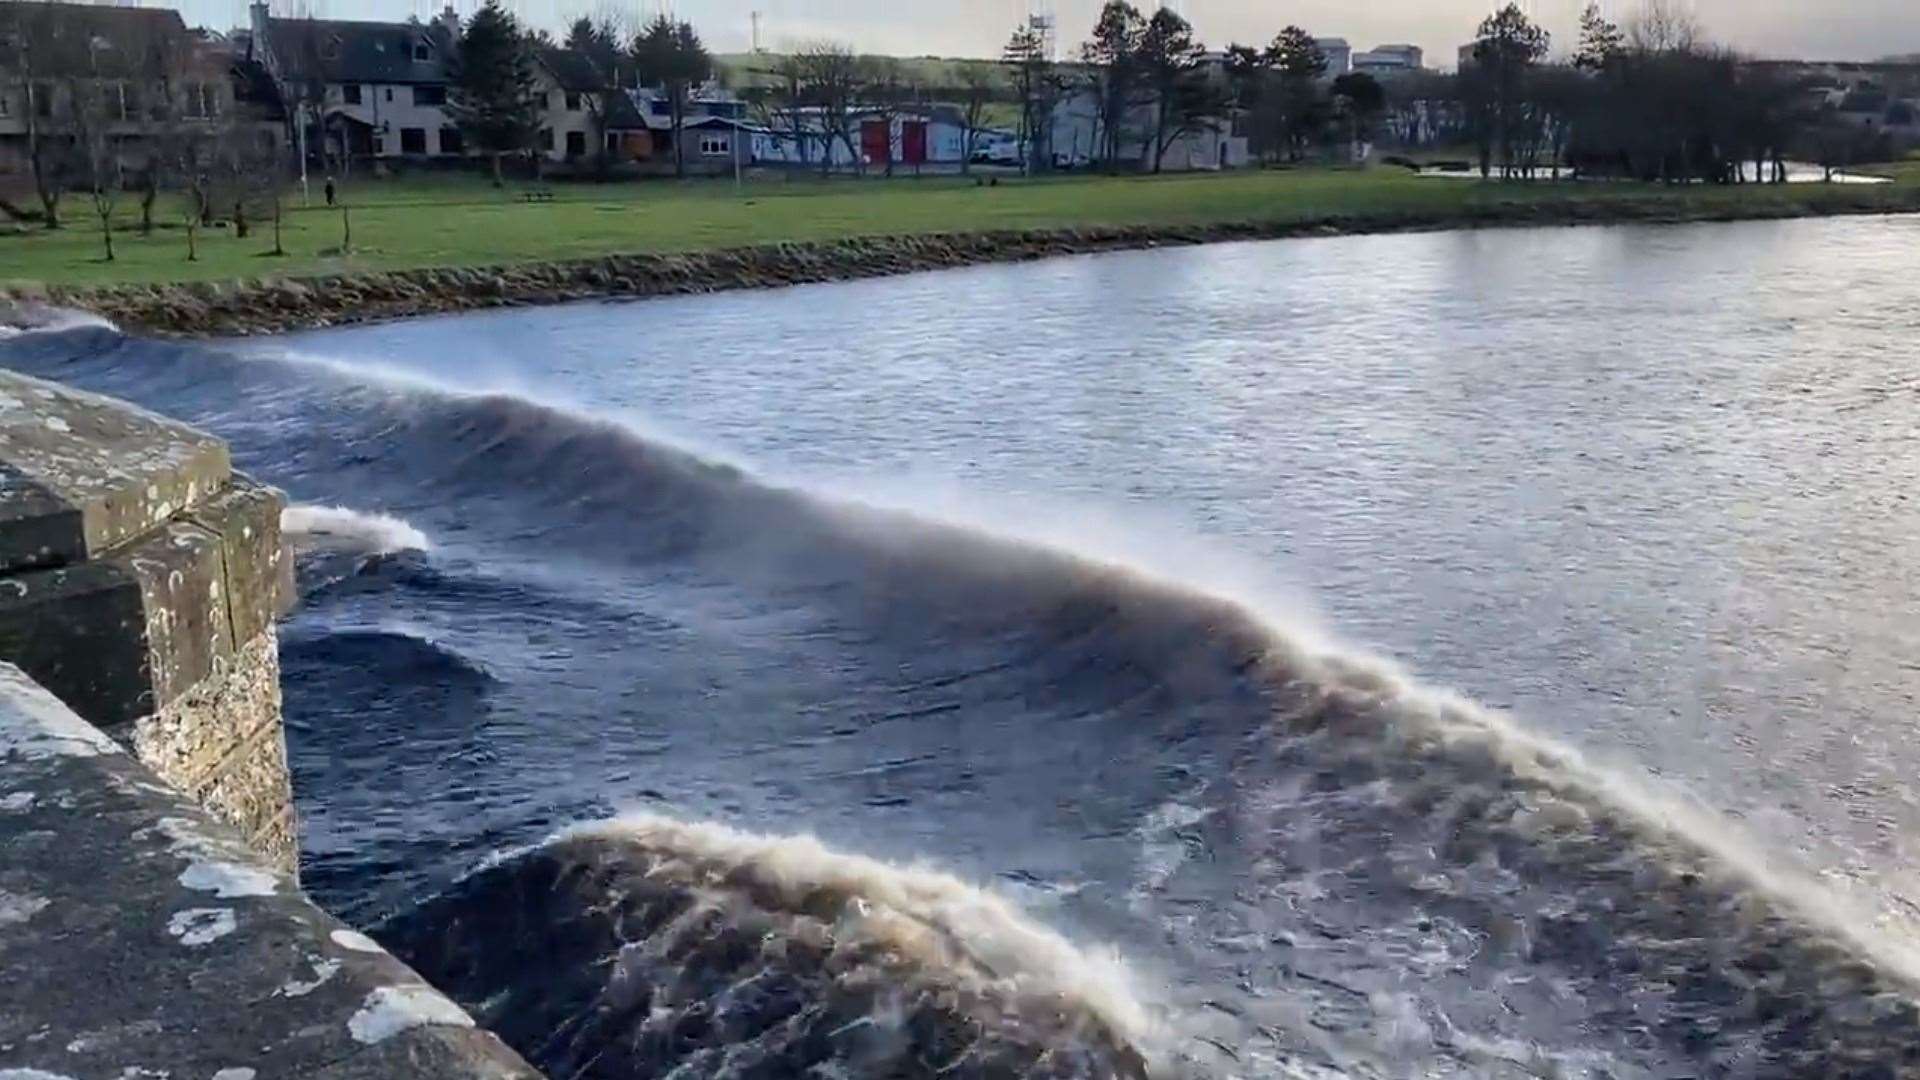 A screenshot from the 45-second tidal surge video captured by Henk Pieter Sterk on Tuesday.